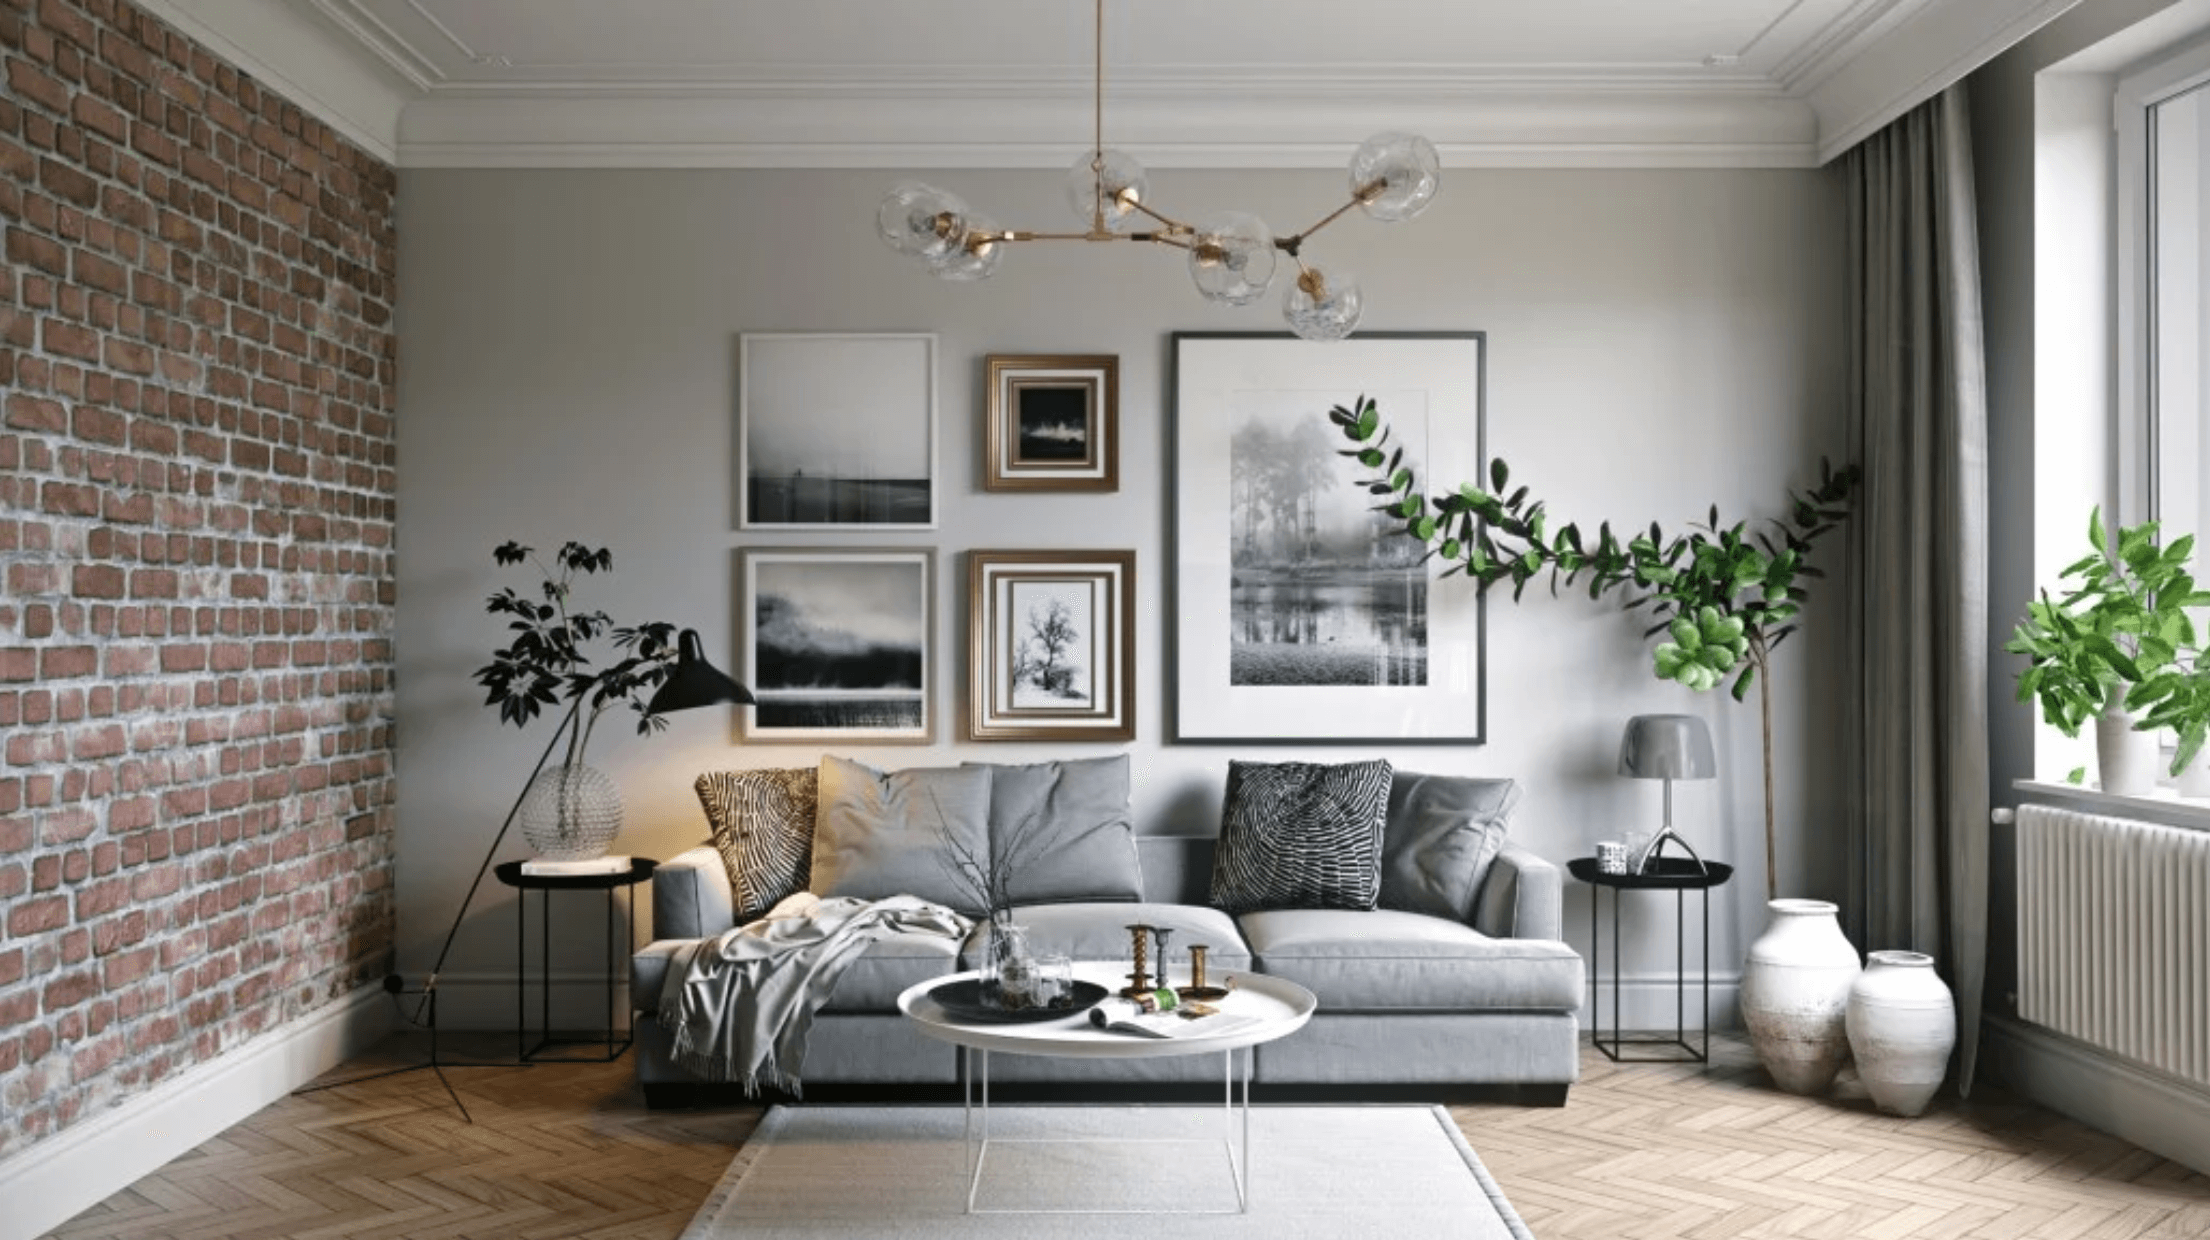 Interior Design Decorating: Transform Your Space With Style